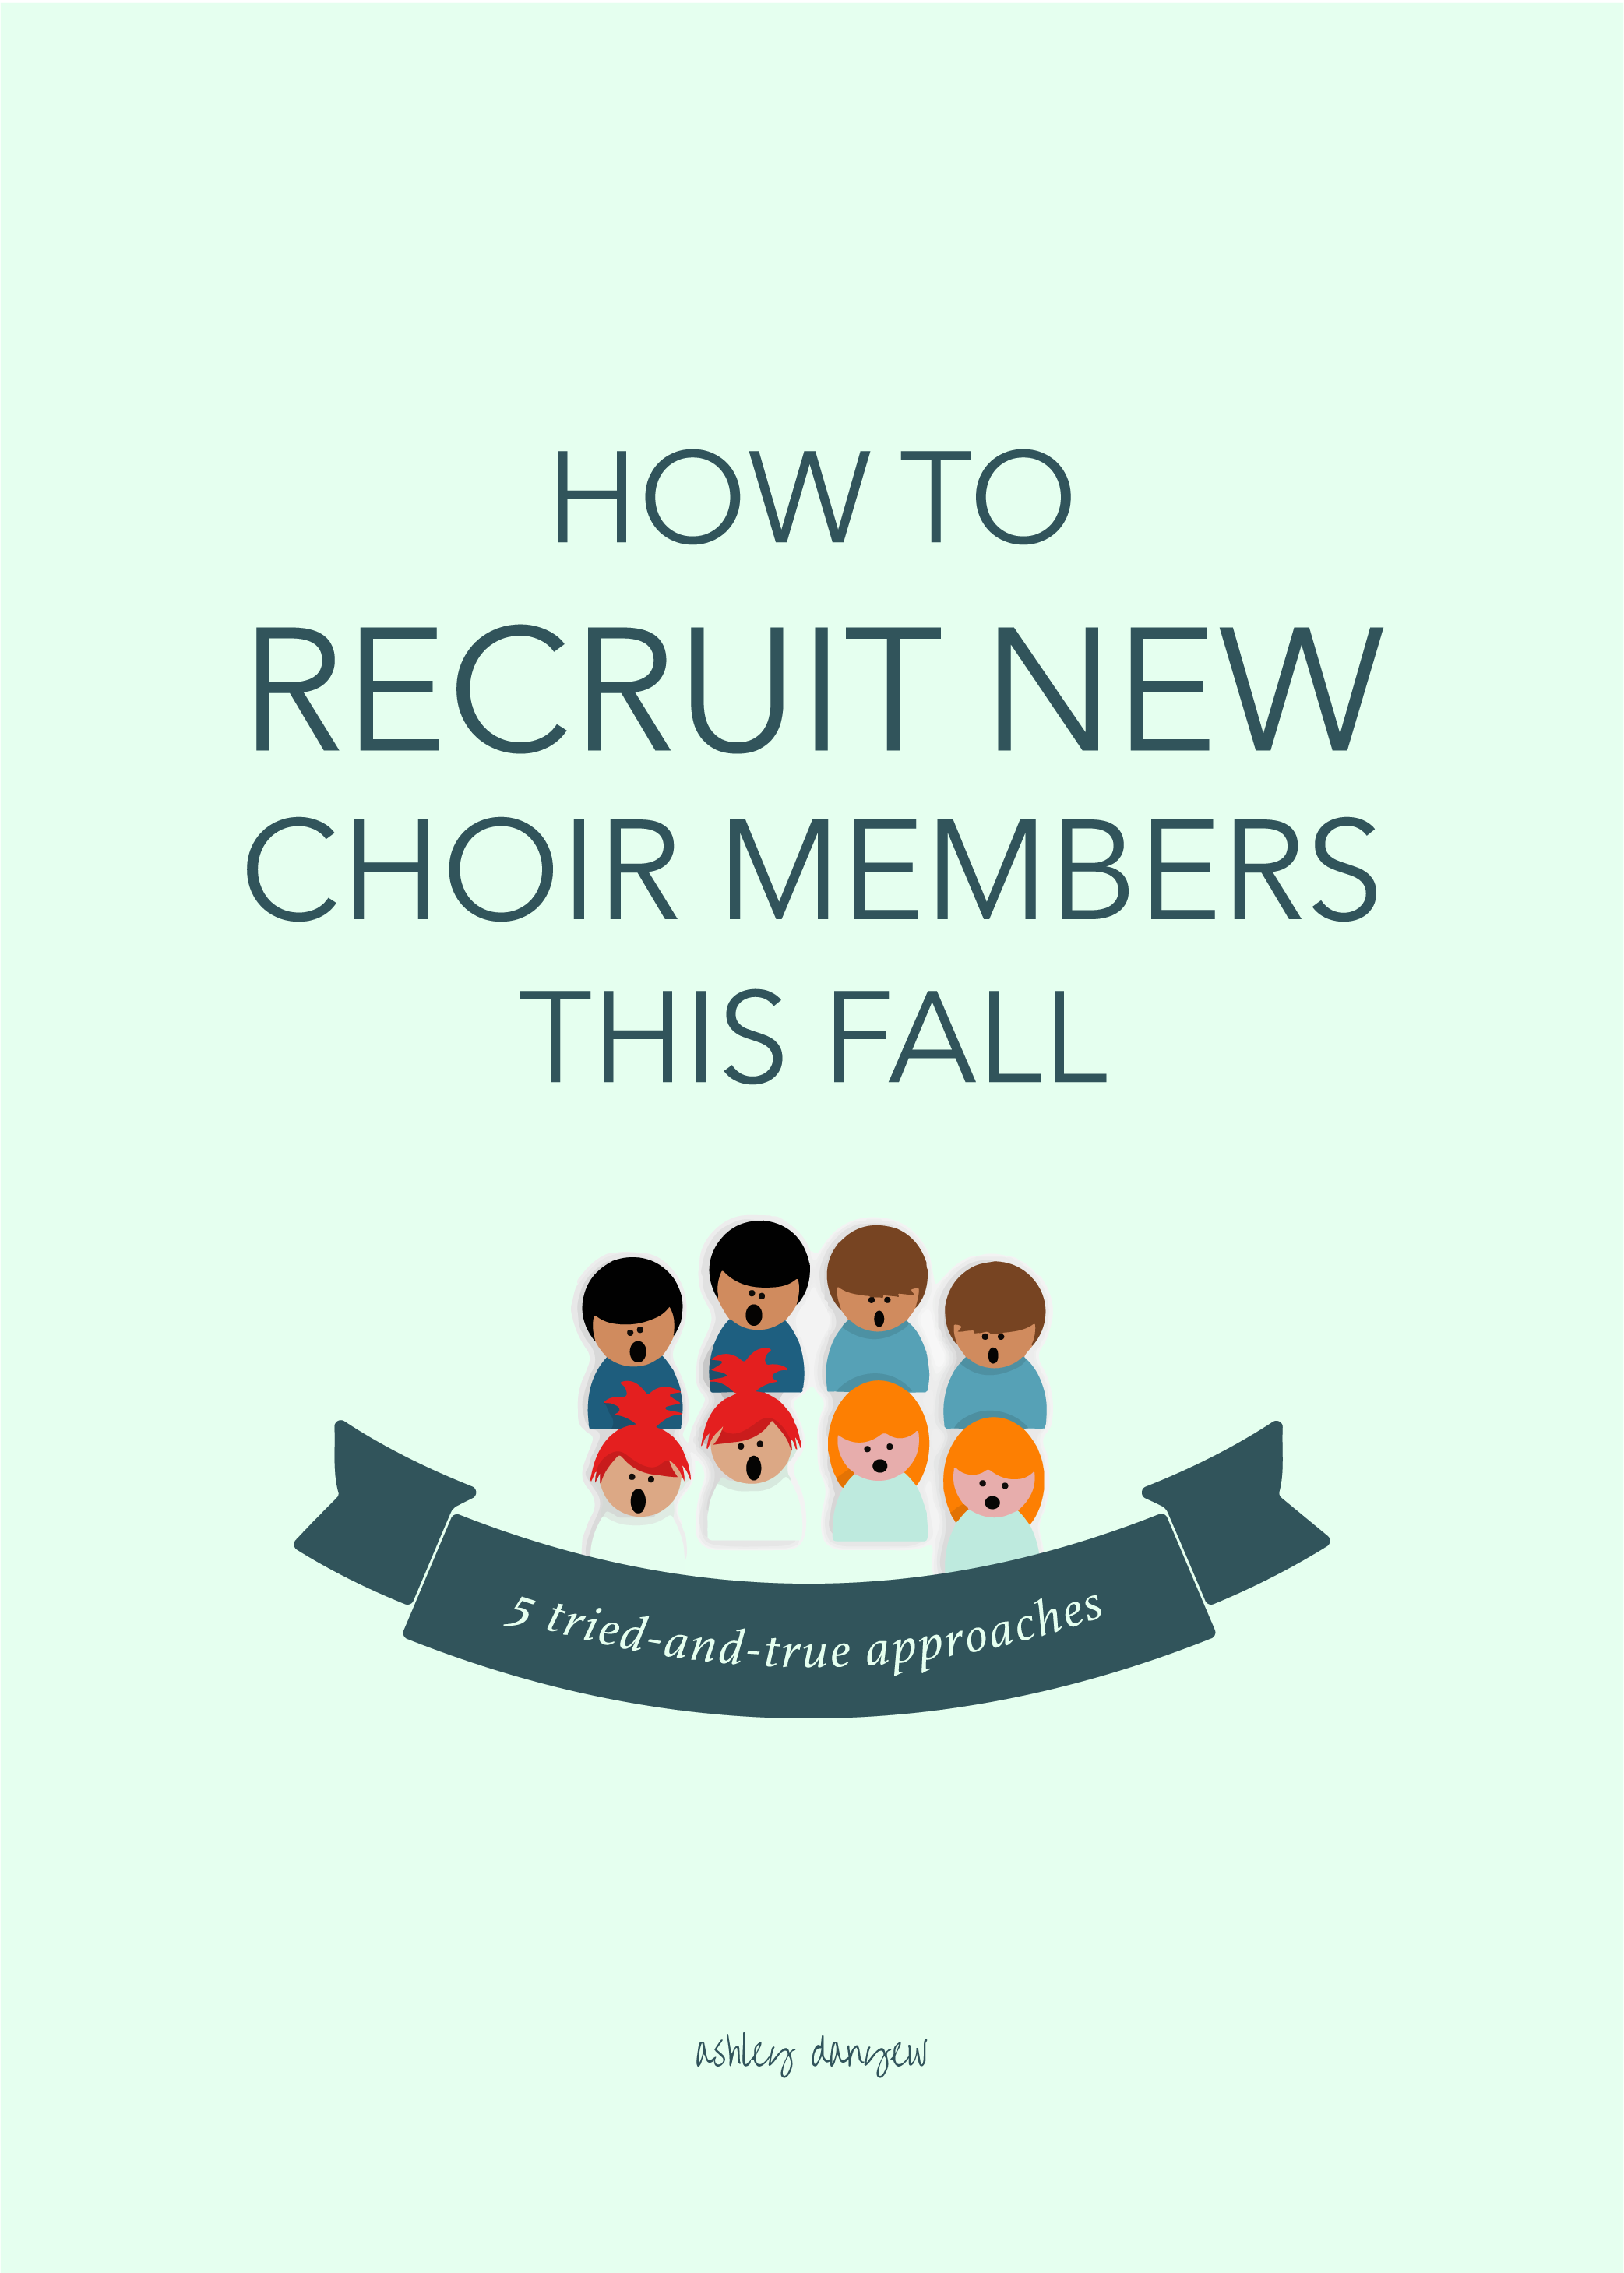 How to Recruit New Choir Members This Fall